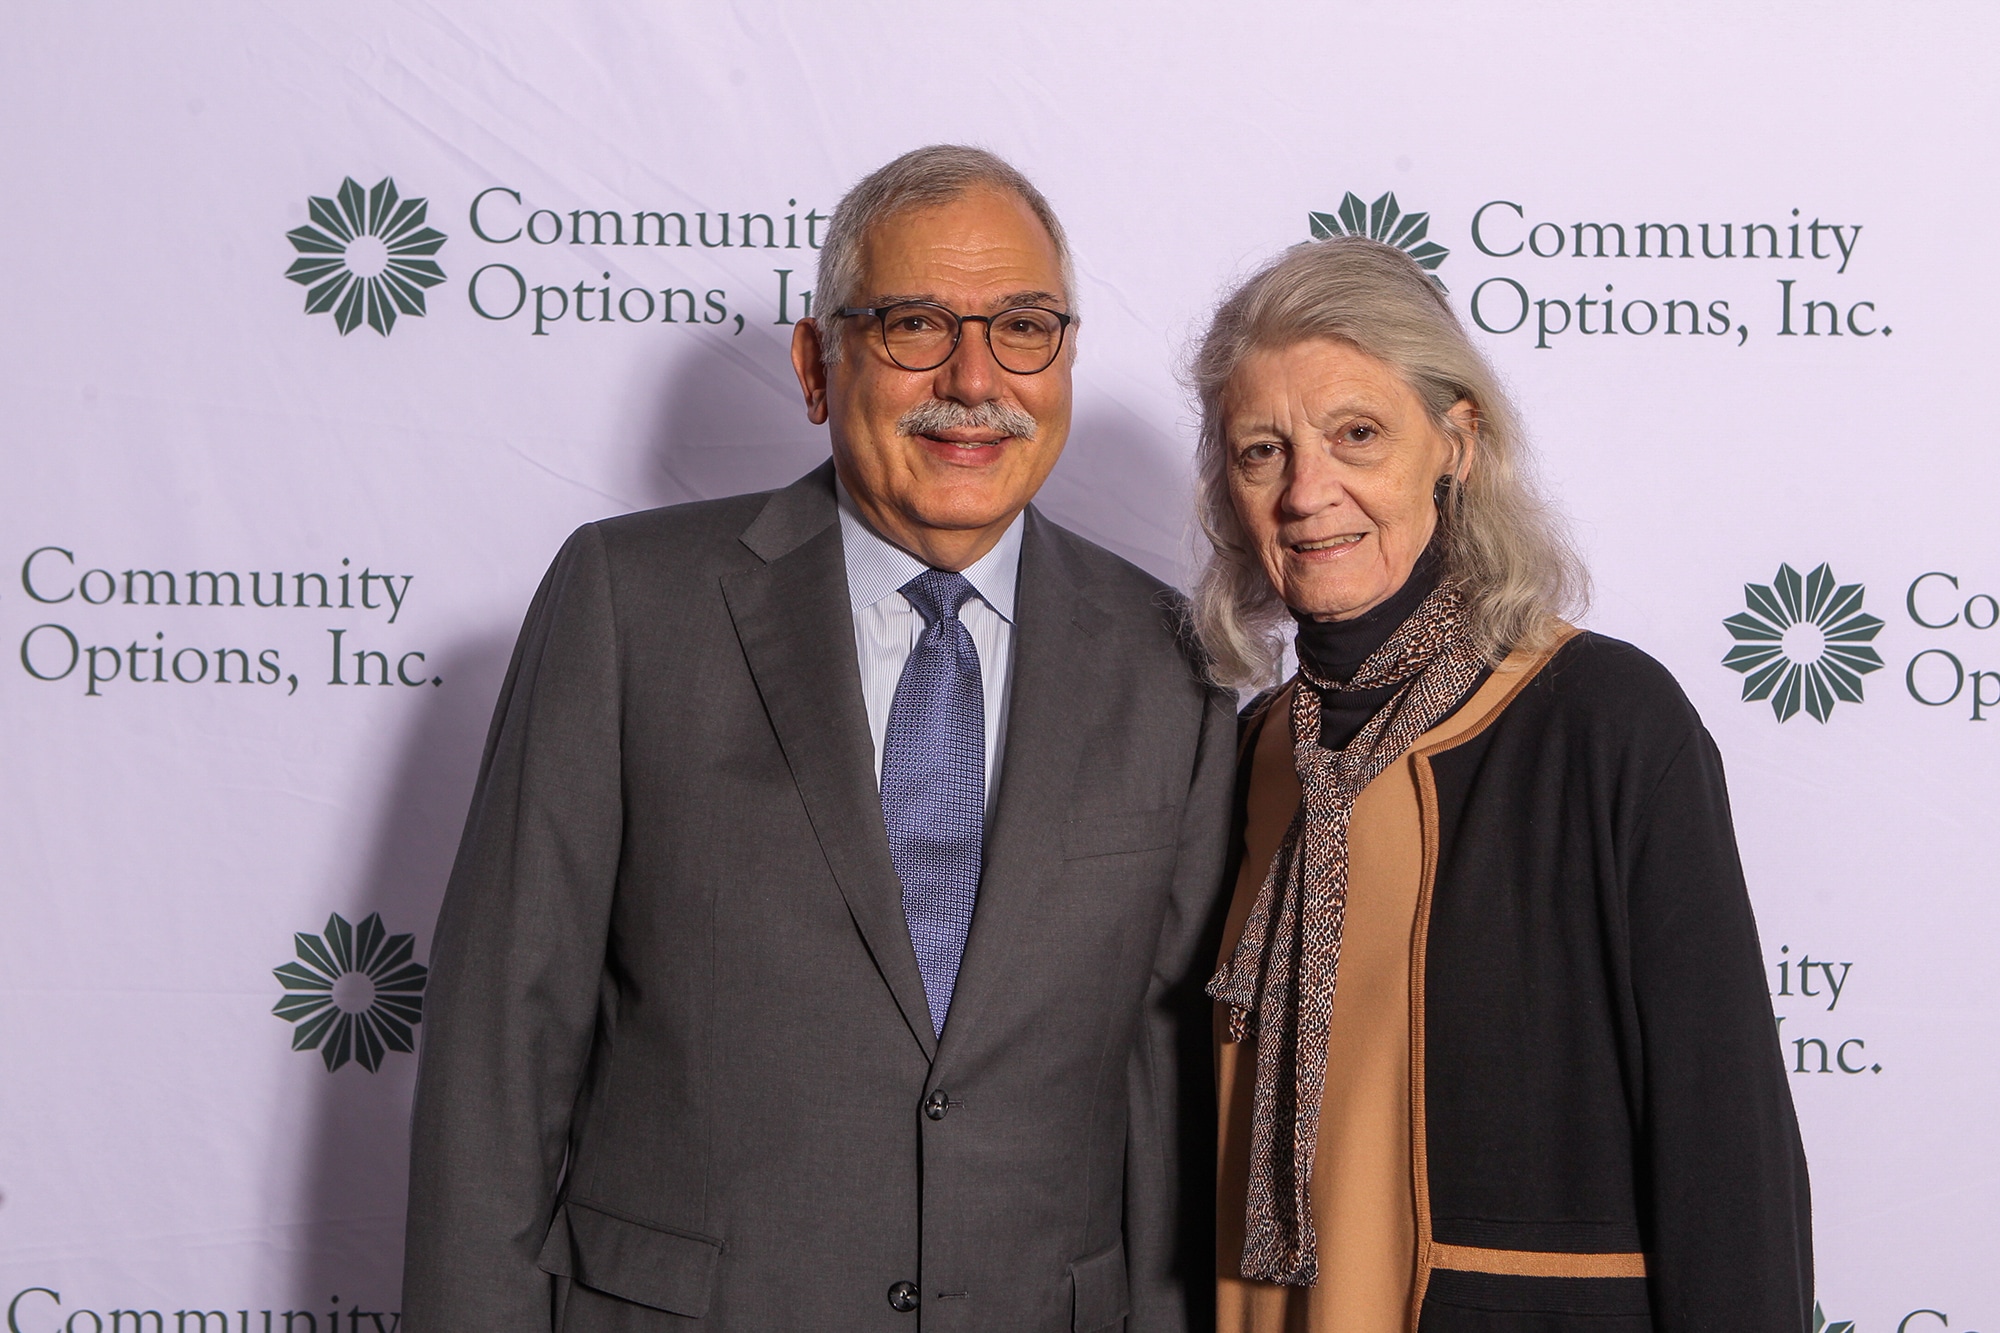 On May 9, 2019, Community Options celebrated its 30th anniversary on the campus of Princeton University at the McCarter Theatre Center Gala Tent. Community Options Enterprises’ Chairman, Philip Lian and his wife, Joan Mueller